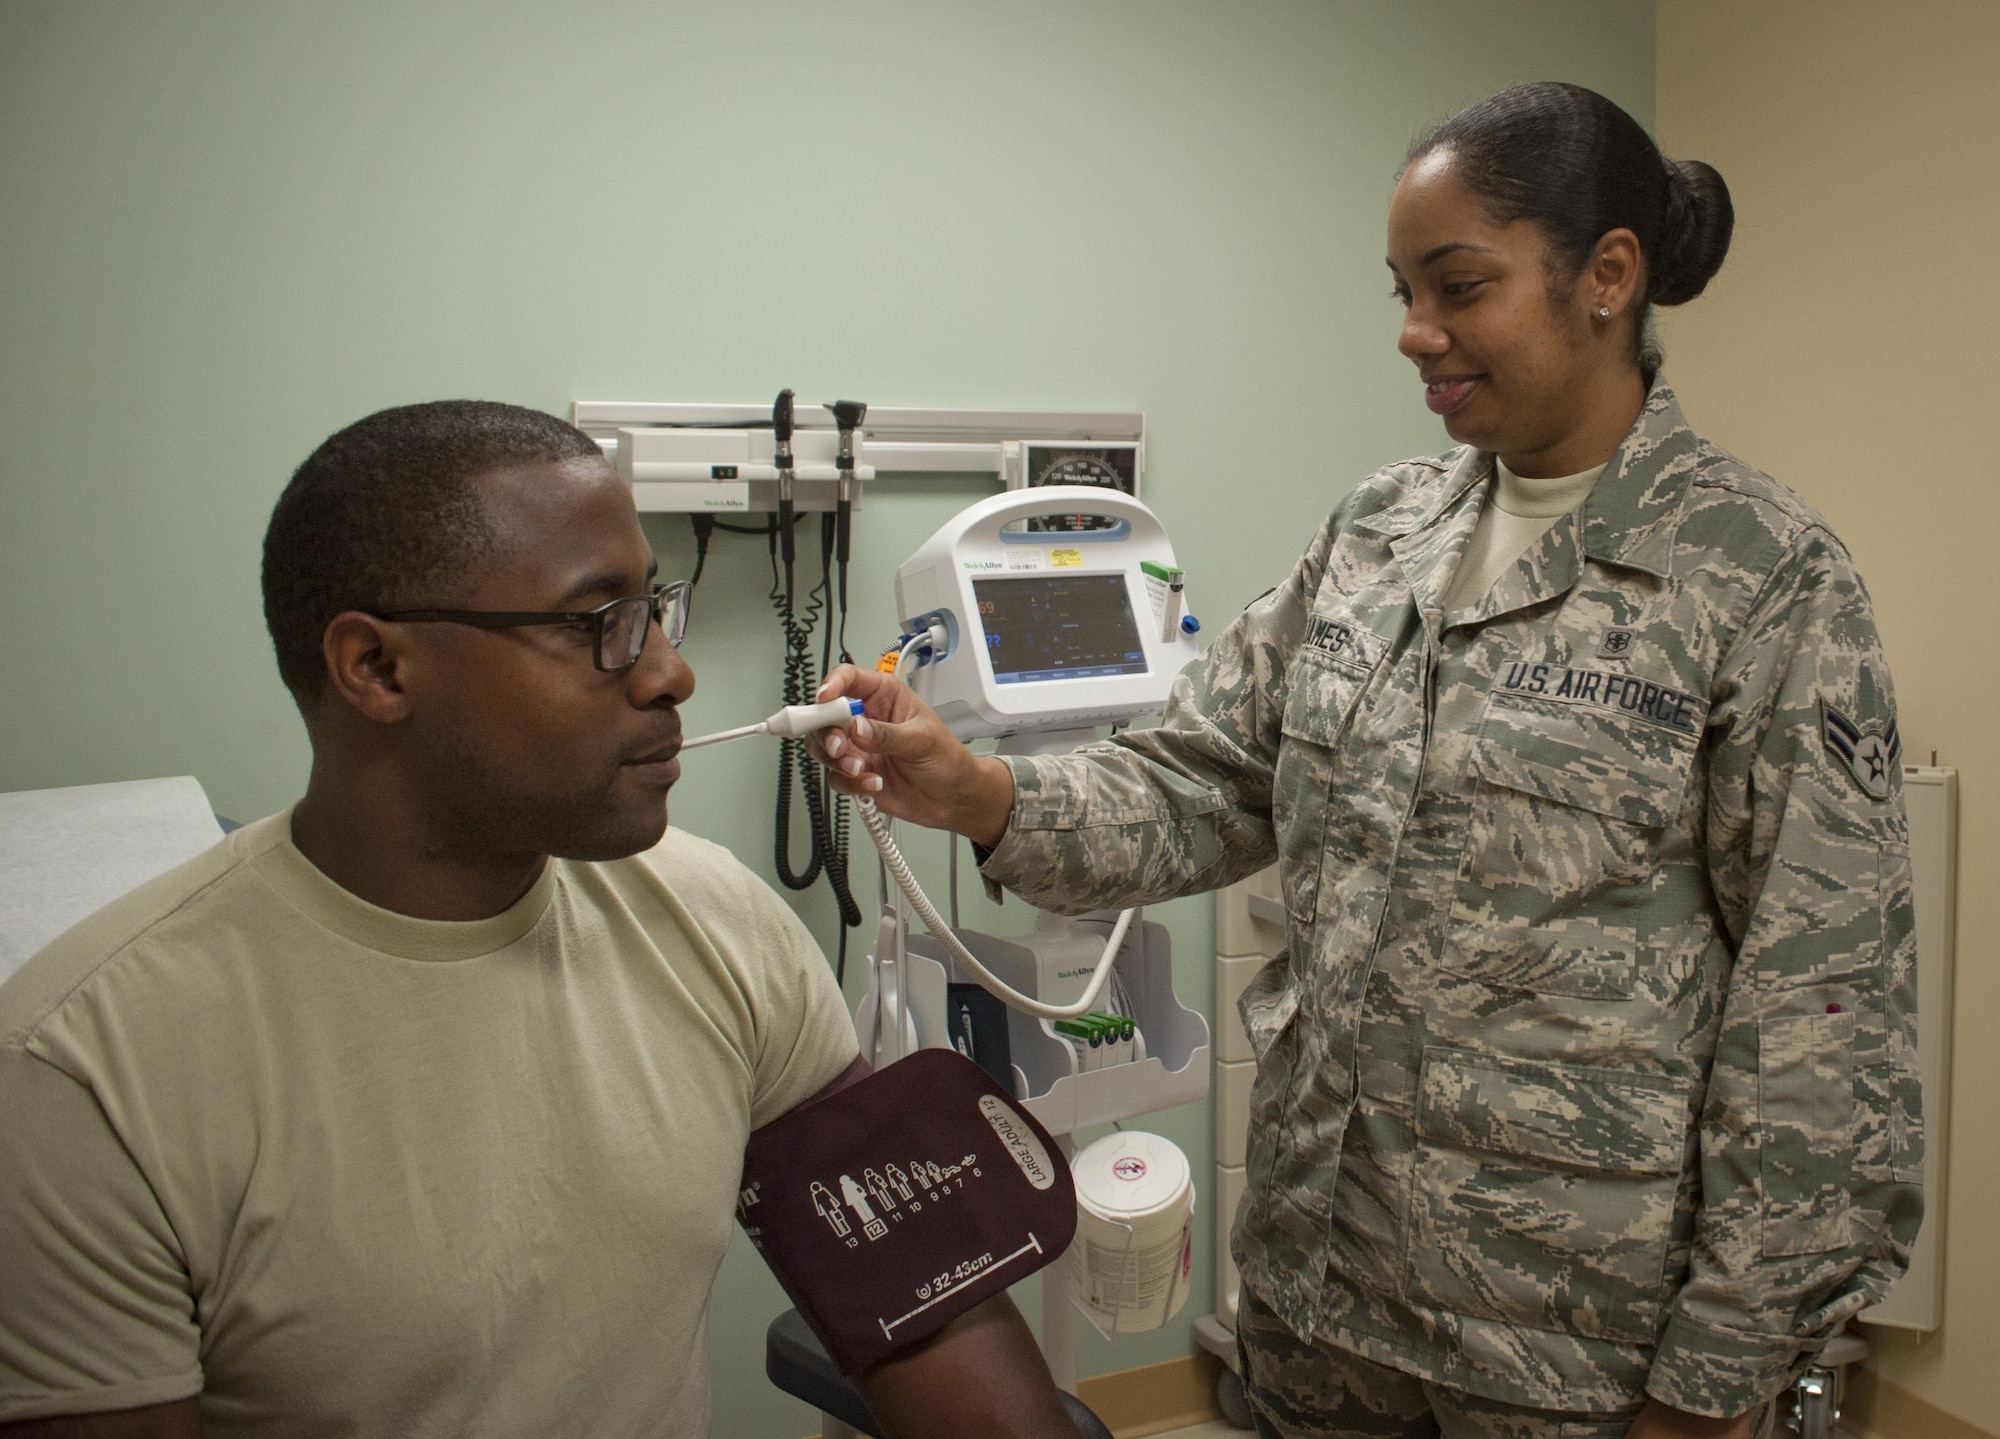 U.S. Air Force Airman 1st Class Alicia James, right, an aerospace medical service technician assigned to the 6th Medical Support Operations Squadron, takes a patient’s temperature and blood pressure in the 6th Medical Group Clinic at MacDill Air Force Base, Fla., Sept. 7, 2017. The family health clinic sees approximately 180 patients daily and averages 39,000 appointments each year. (U.S. Air Force photo by Senior Airman Mariette Adams)